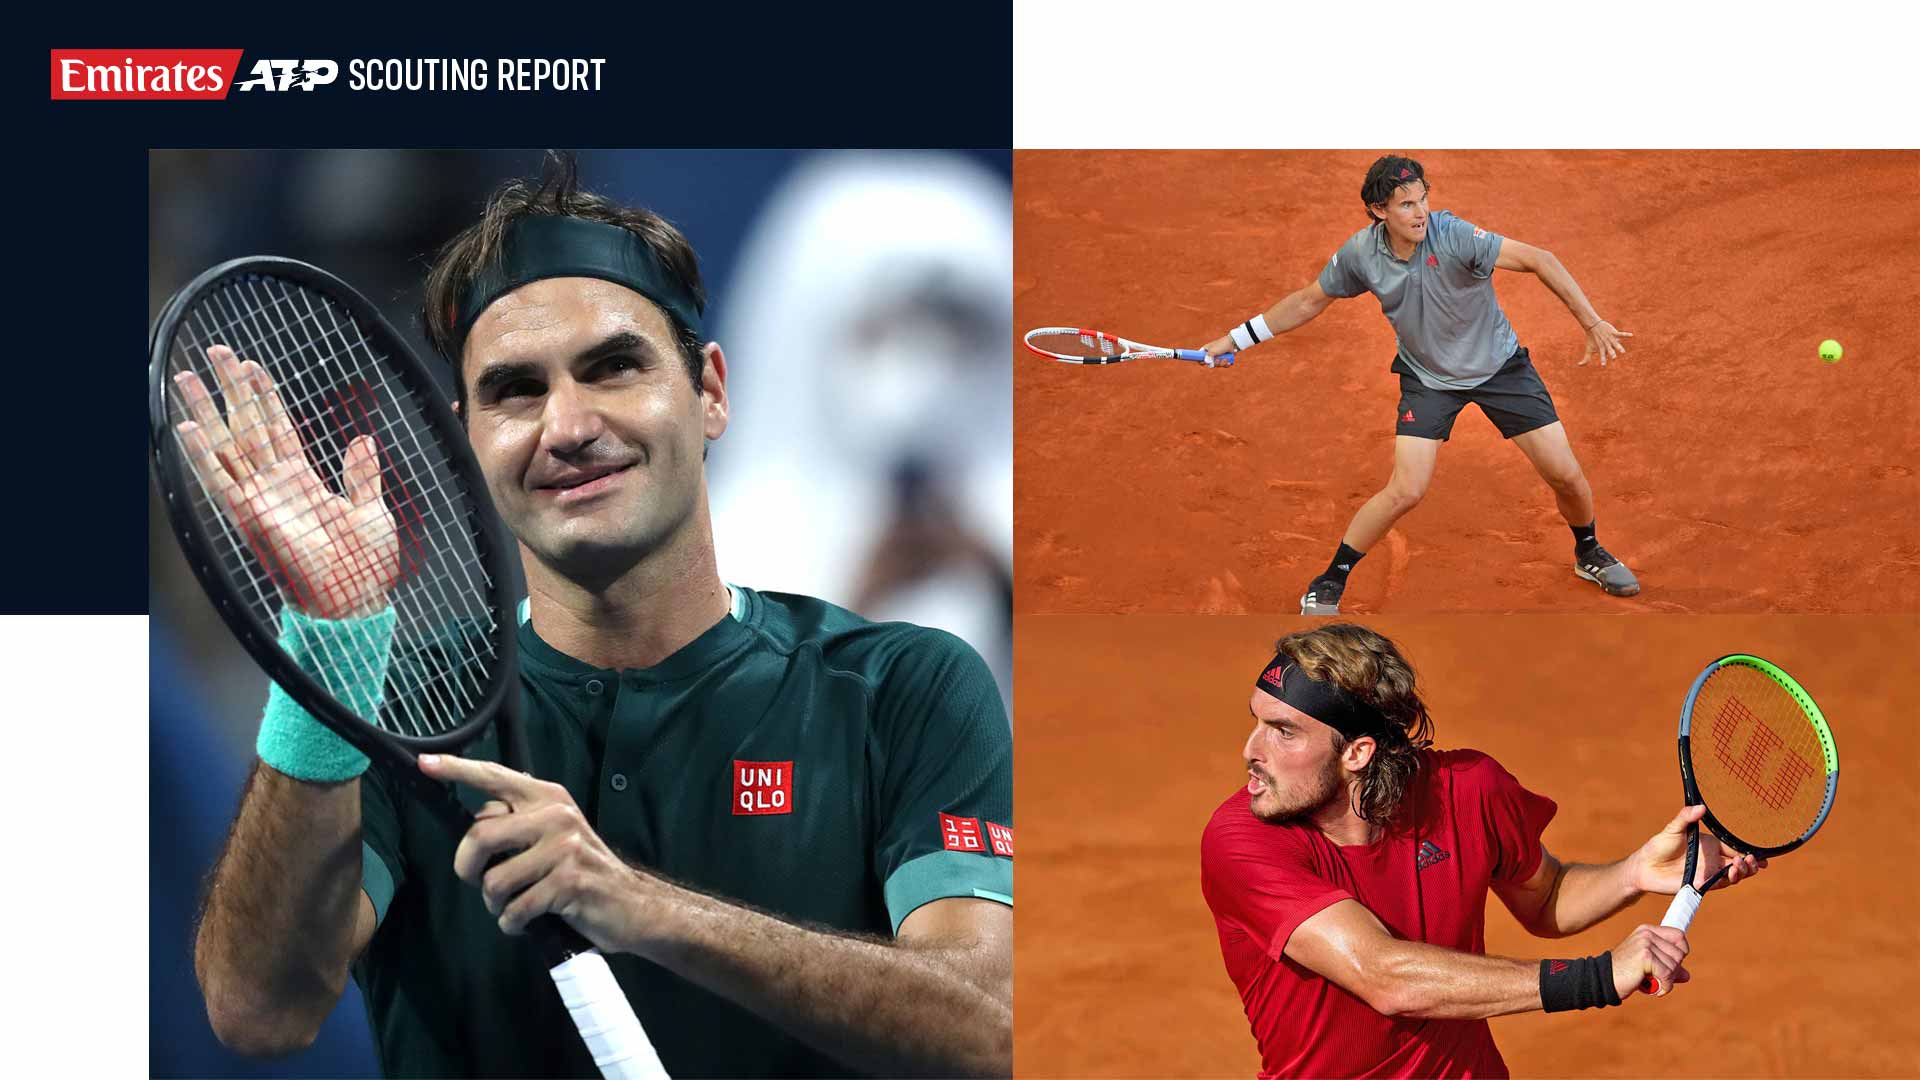 Scouting Report: Federer Leads The Way In Geneva, Thiem & Ts